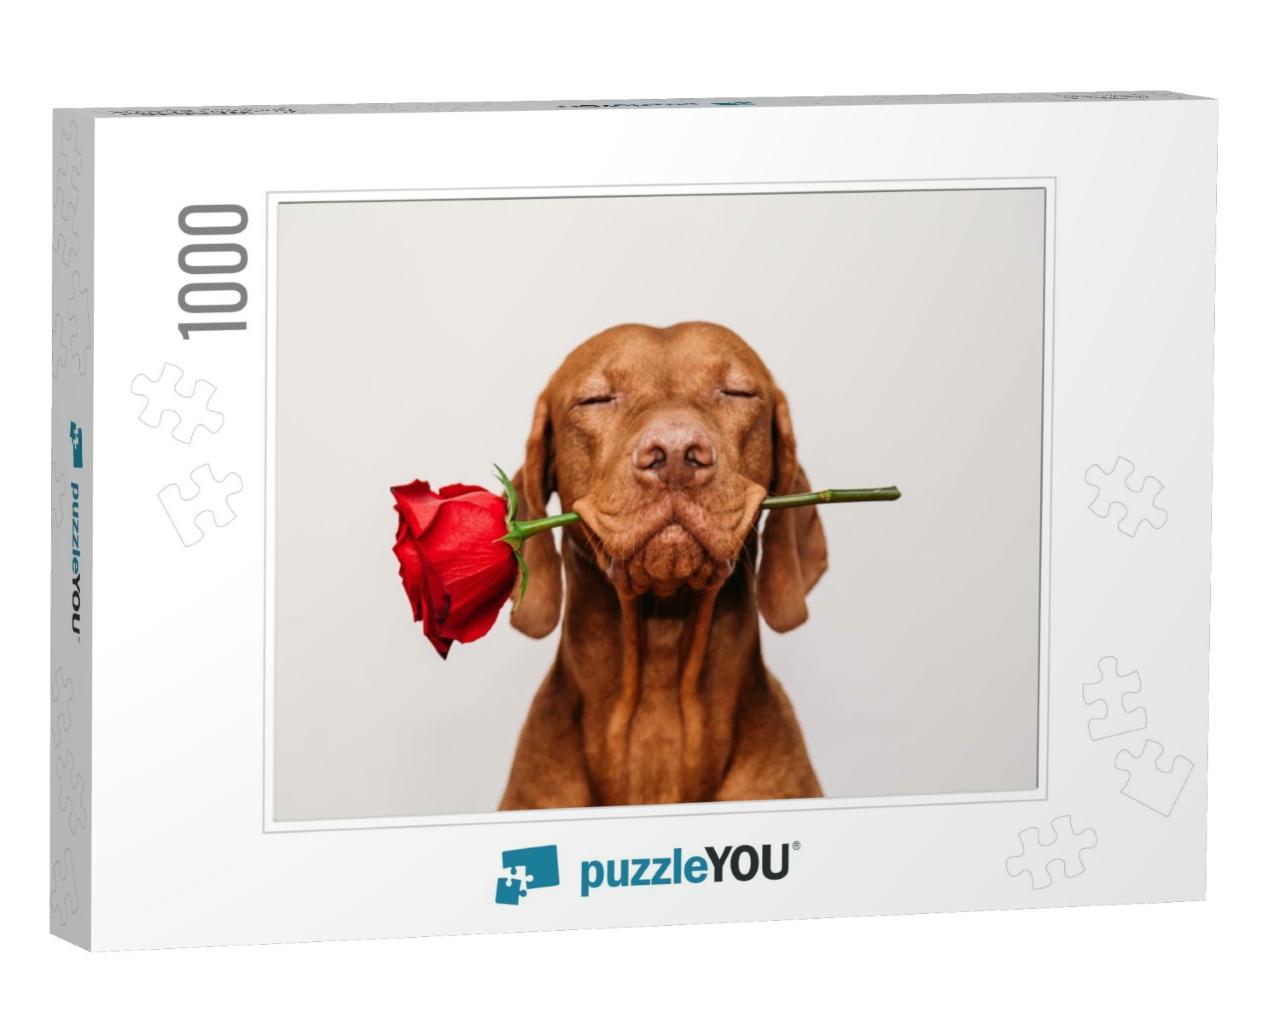 Charming Red-Haired Vizsla Dog with Eyes Closed Ho... Jigsaw Puzzle with 1000 pieces